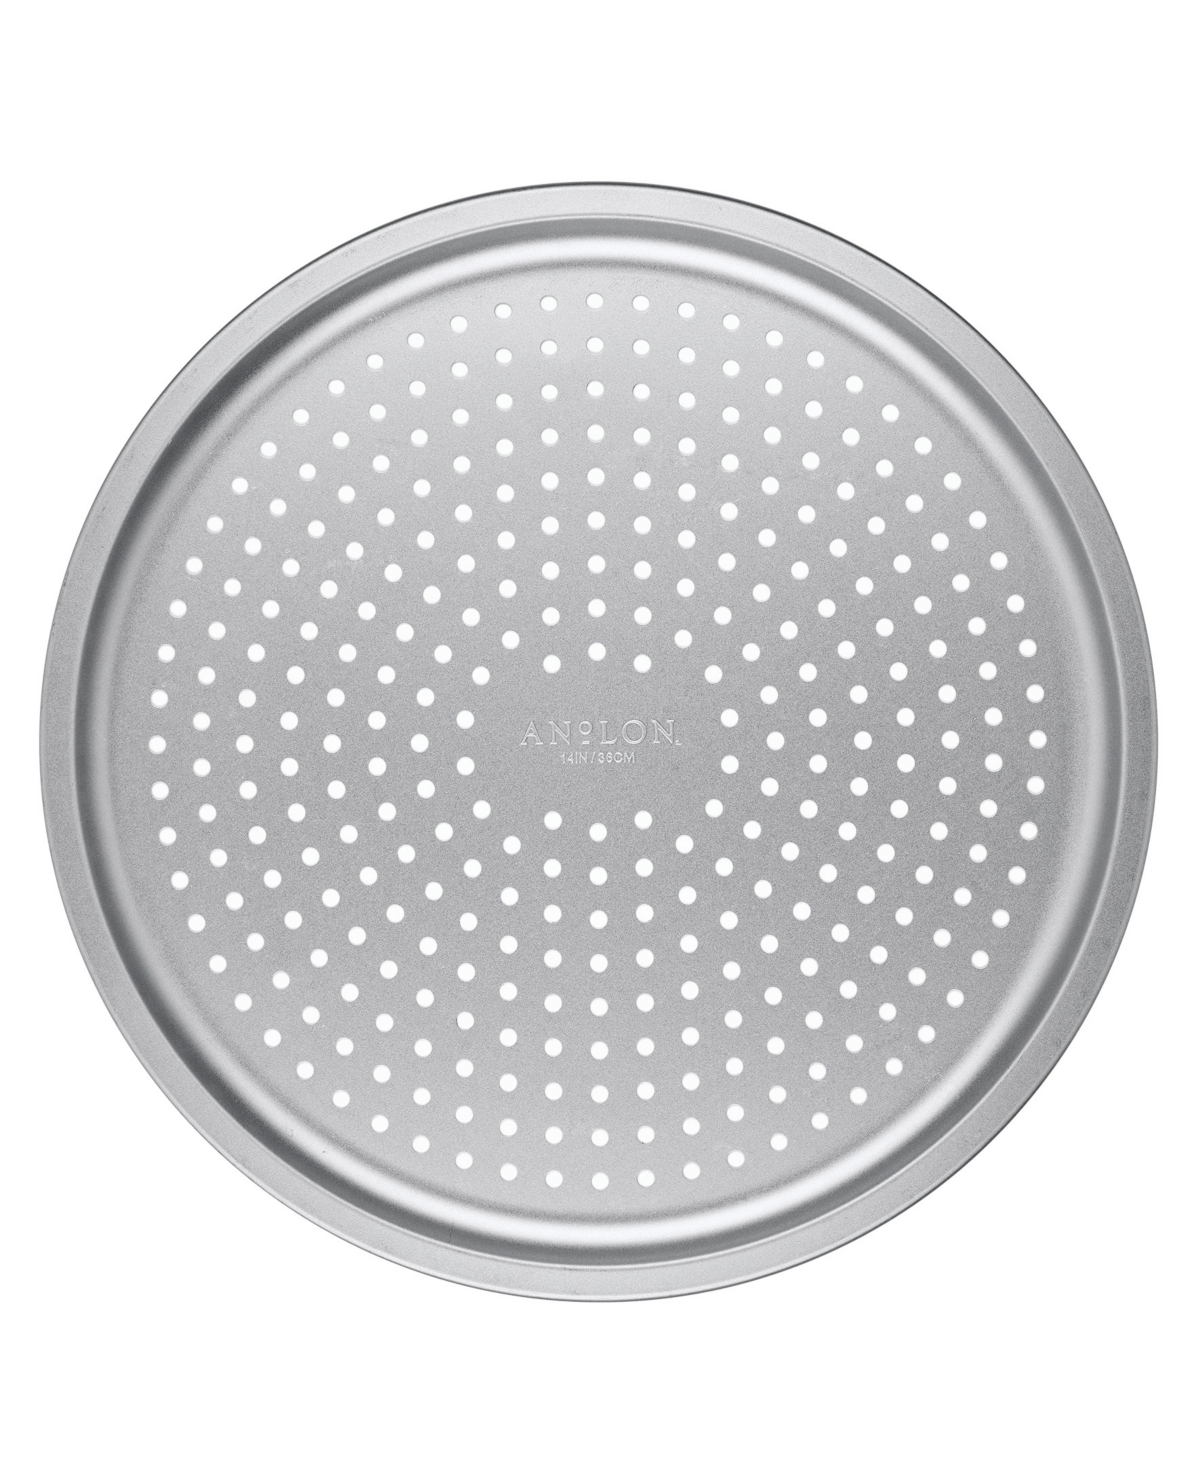 Anolon Pro-bake Bakeware Aluminized Steel Perforated Pizza Pan, 14" In Silver-tone